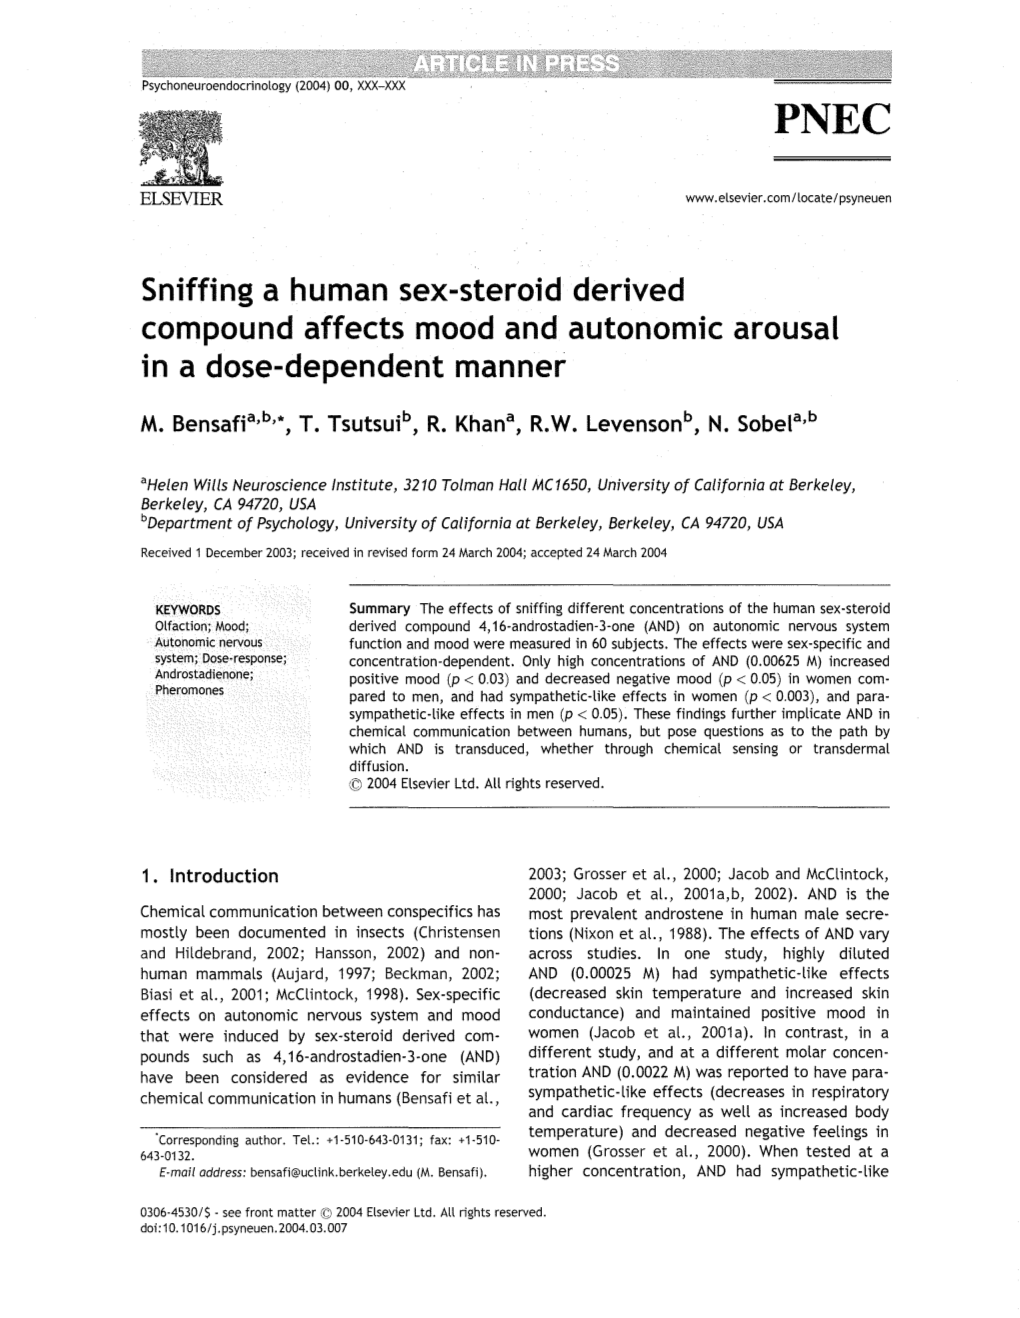 Sniffing a Human Sex-Steroid Derived Compound Affects Mood and Autonomic Arousal in a Dose-Dependent Manner